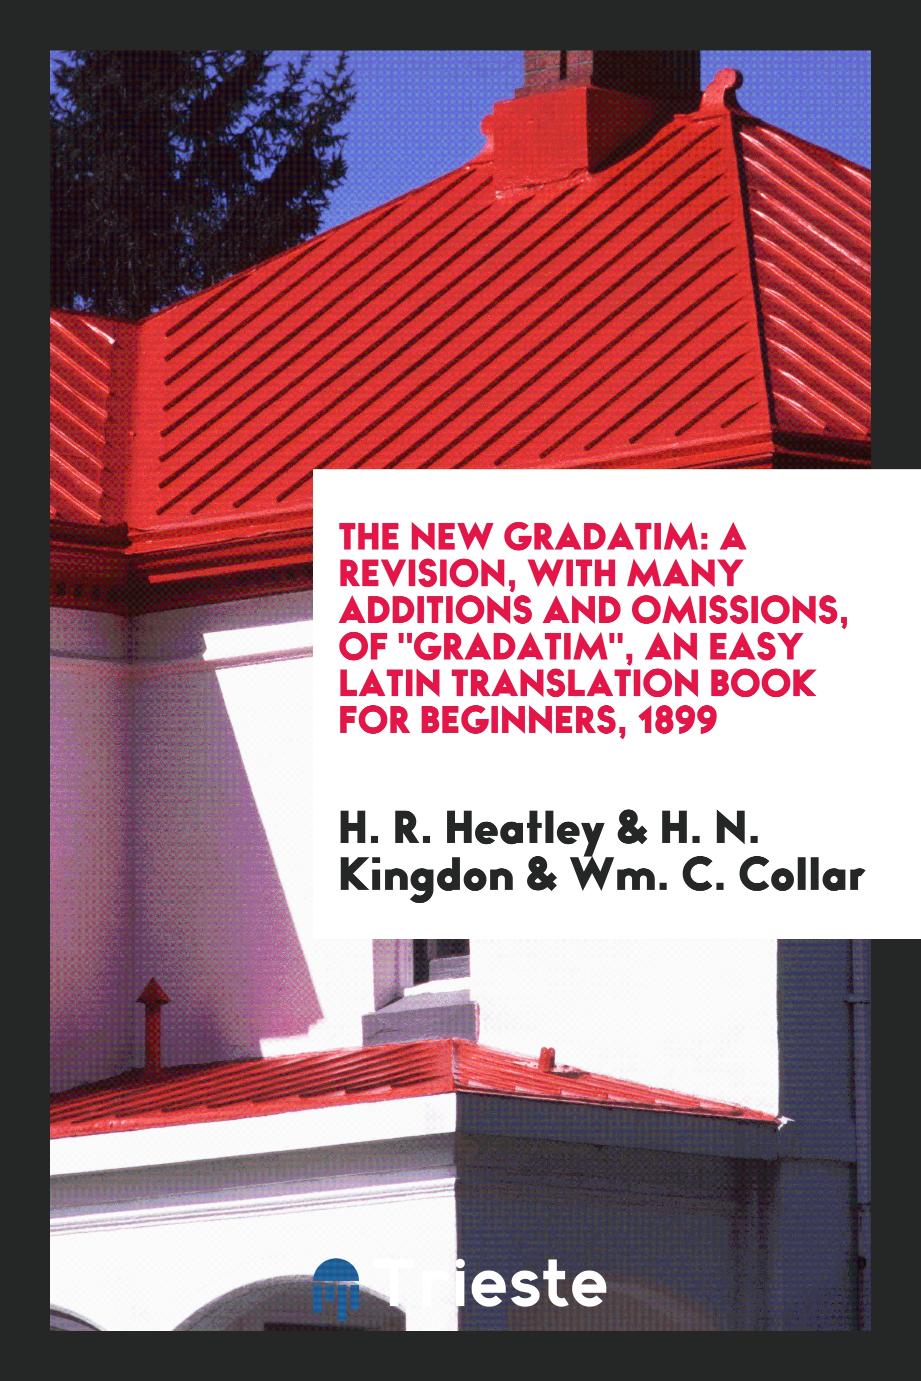 The New Gradatim: A Revision, with Many Additions and Omissions, Of "Gradatim", an Easy Latin Translation Book for Beginners, 1899